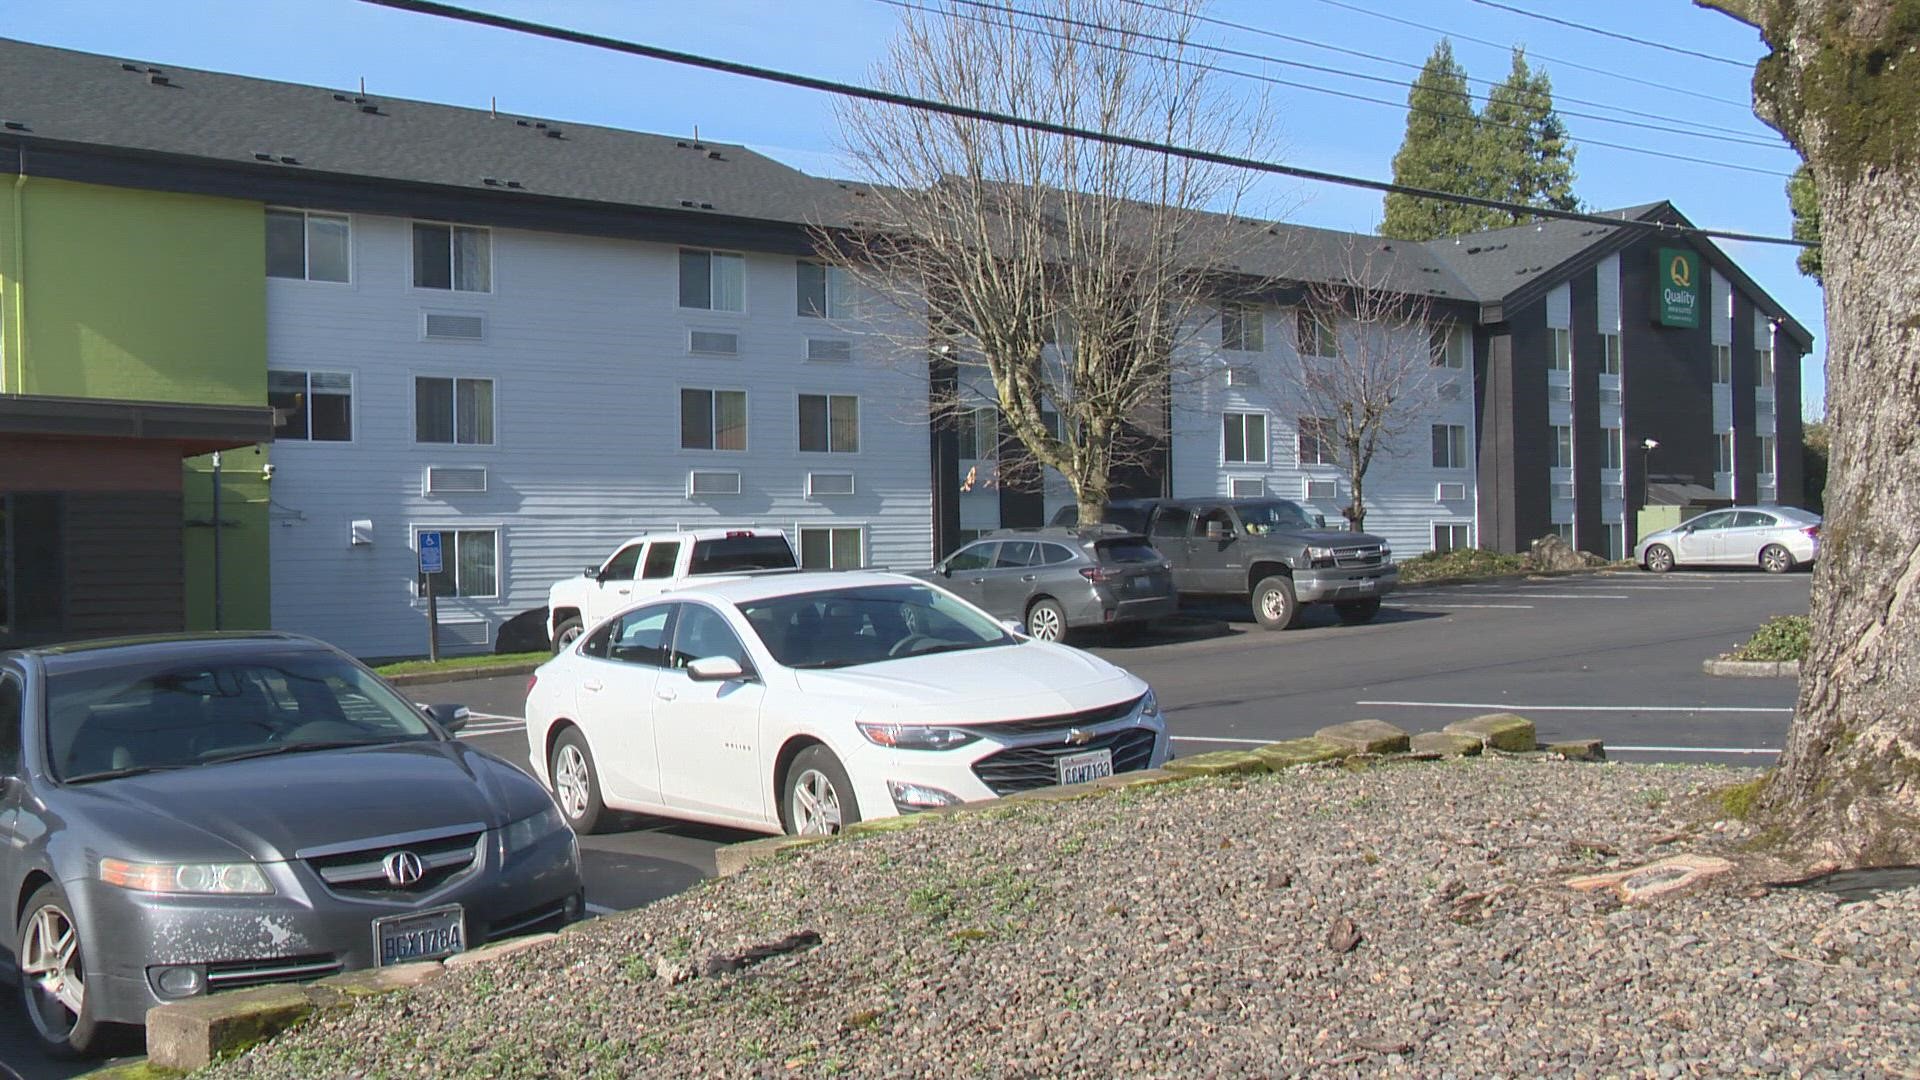 Clackamas county is seeking to purchase a Quality Inn near I-205 and Sunnyside road in hopes of transforming it into a transitional housing for the homeless.